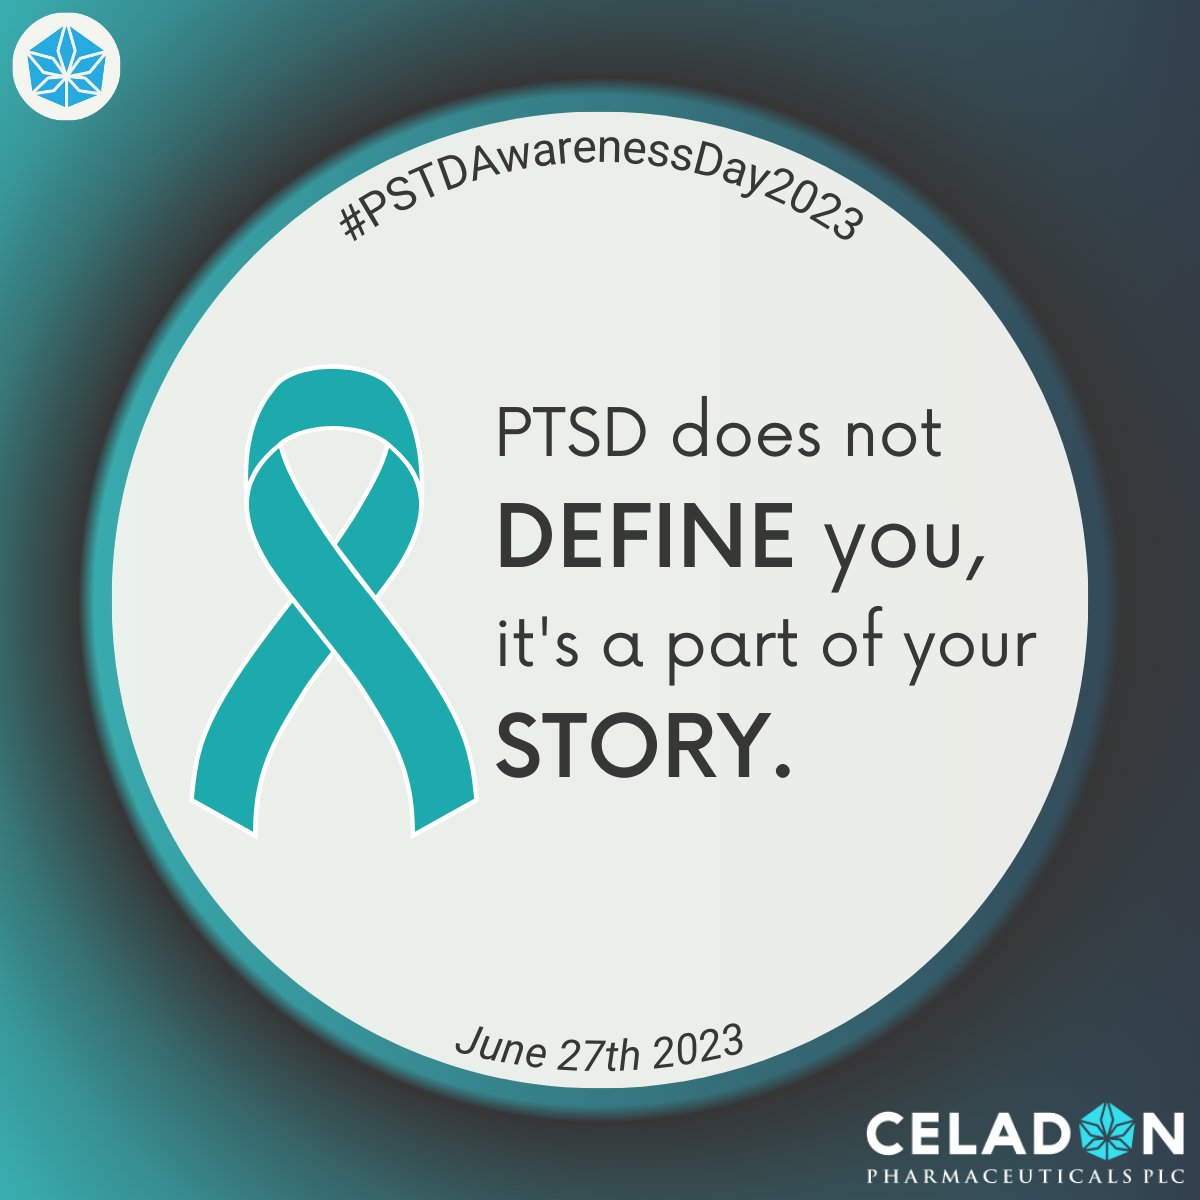 Today marks PTSD Awareness Day, a time to shed light on the invisible wounds affecting many individuals worldwide. It's a reminder to break the stigma surrounding mental health and encourage more understanding, support, and resources around PTSD.